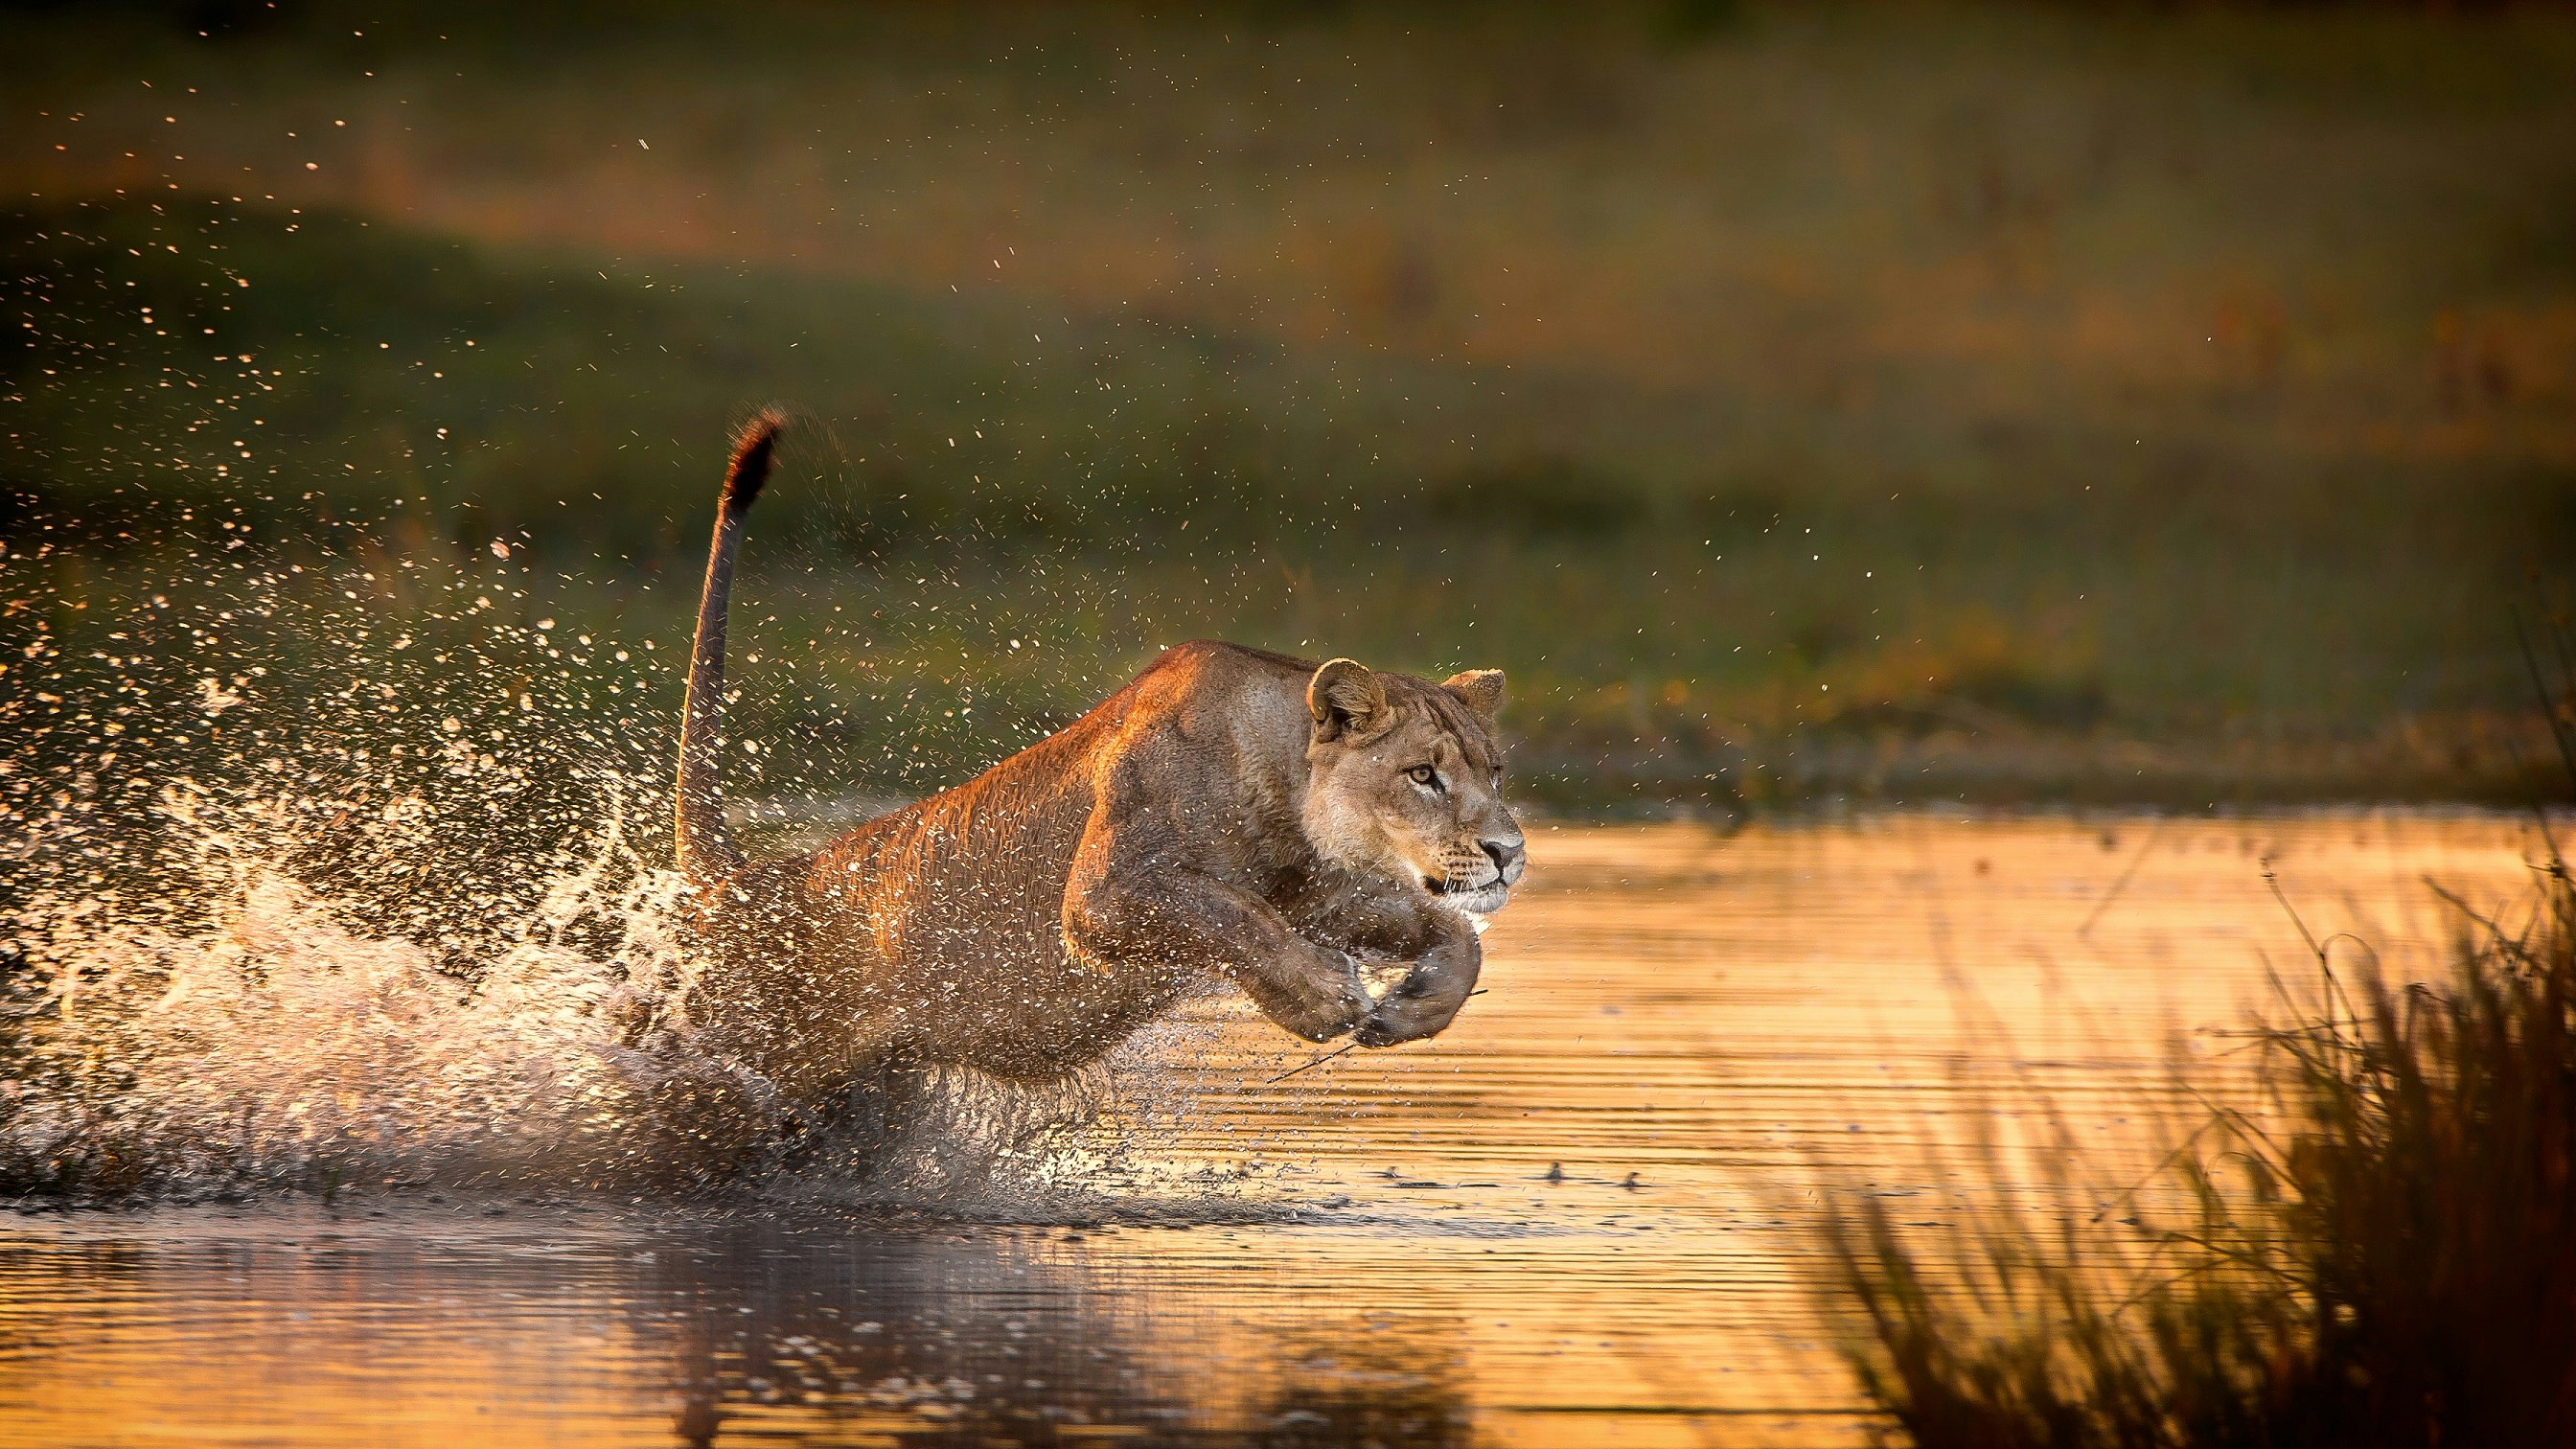 A lone lioness leaps through the waters of the Okavango Delta; her hind legs are beneath the surface while her front paws are pulled up close to her chest, up in the air.